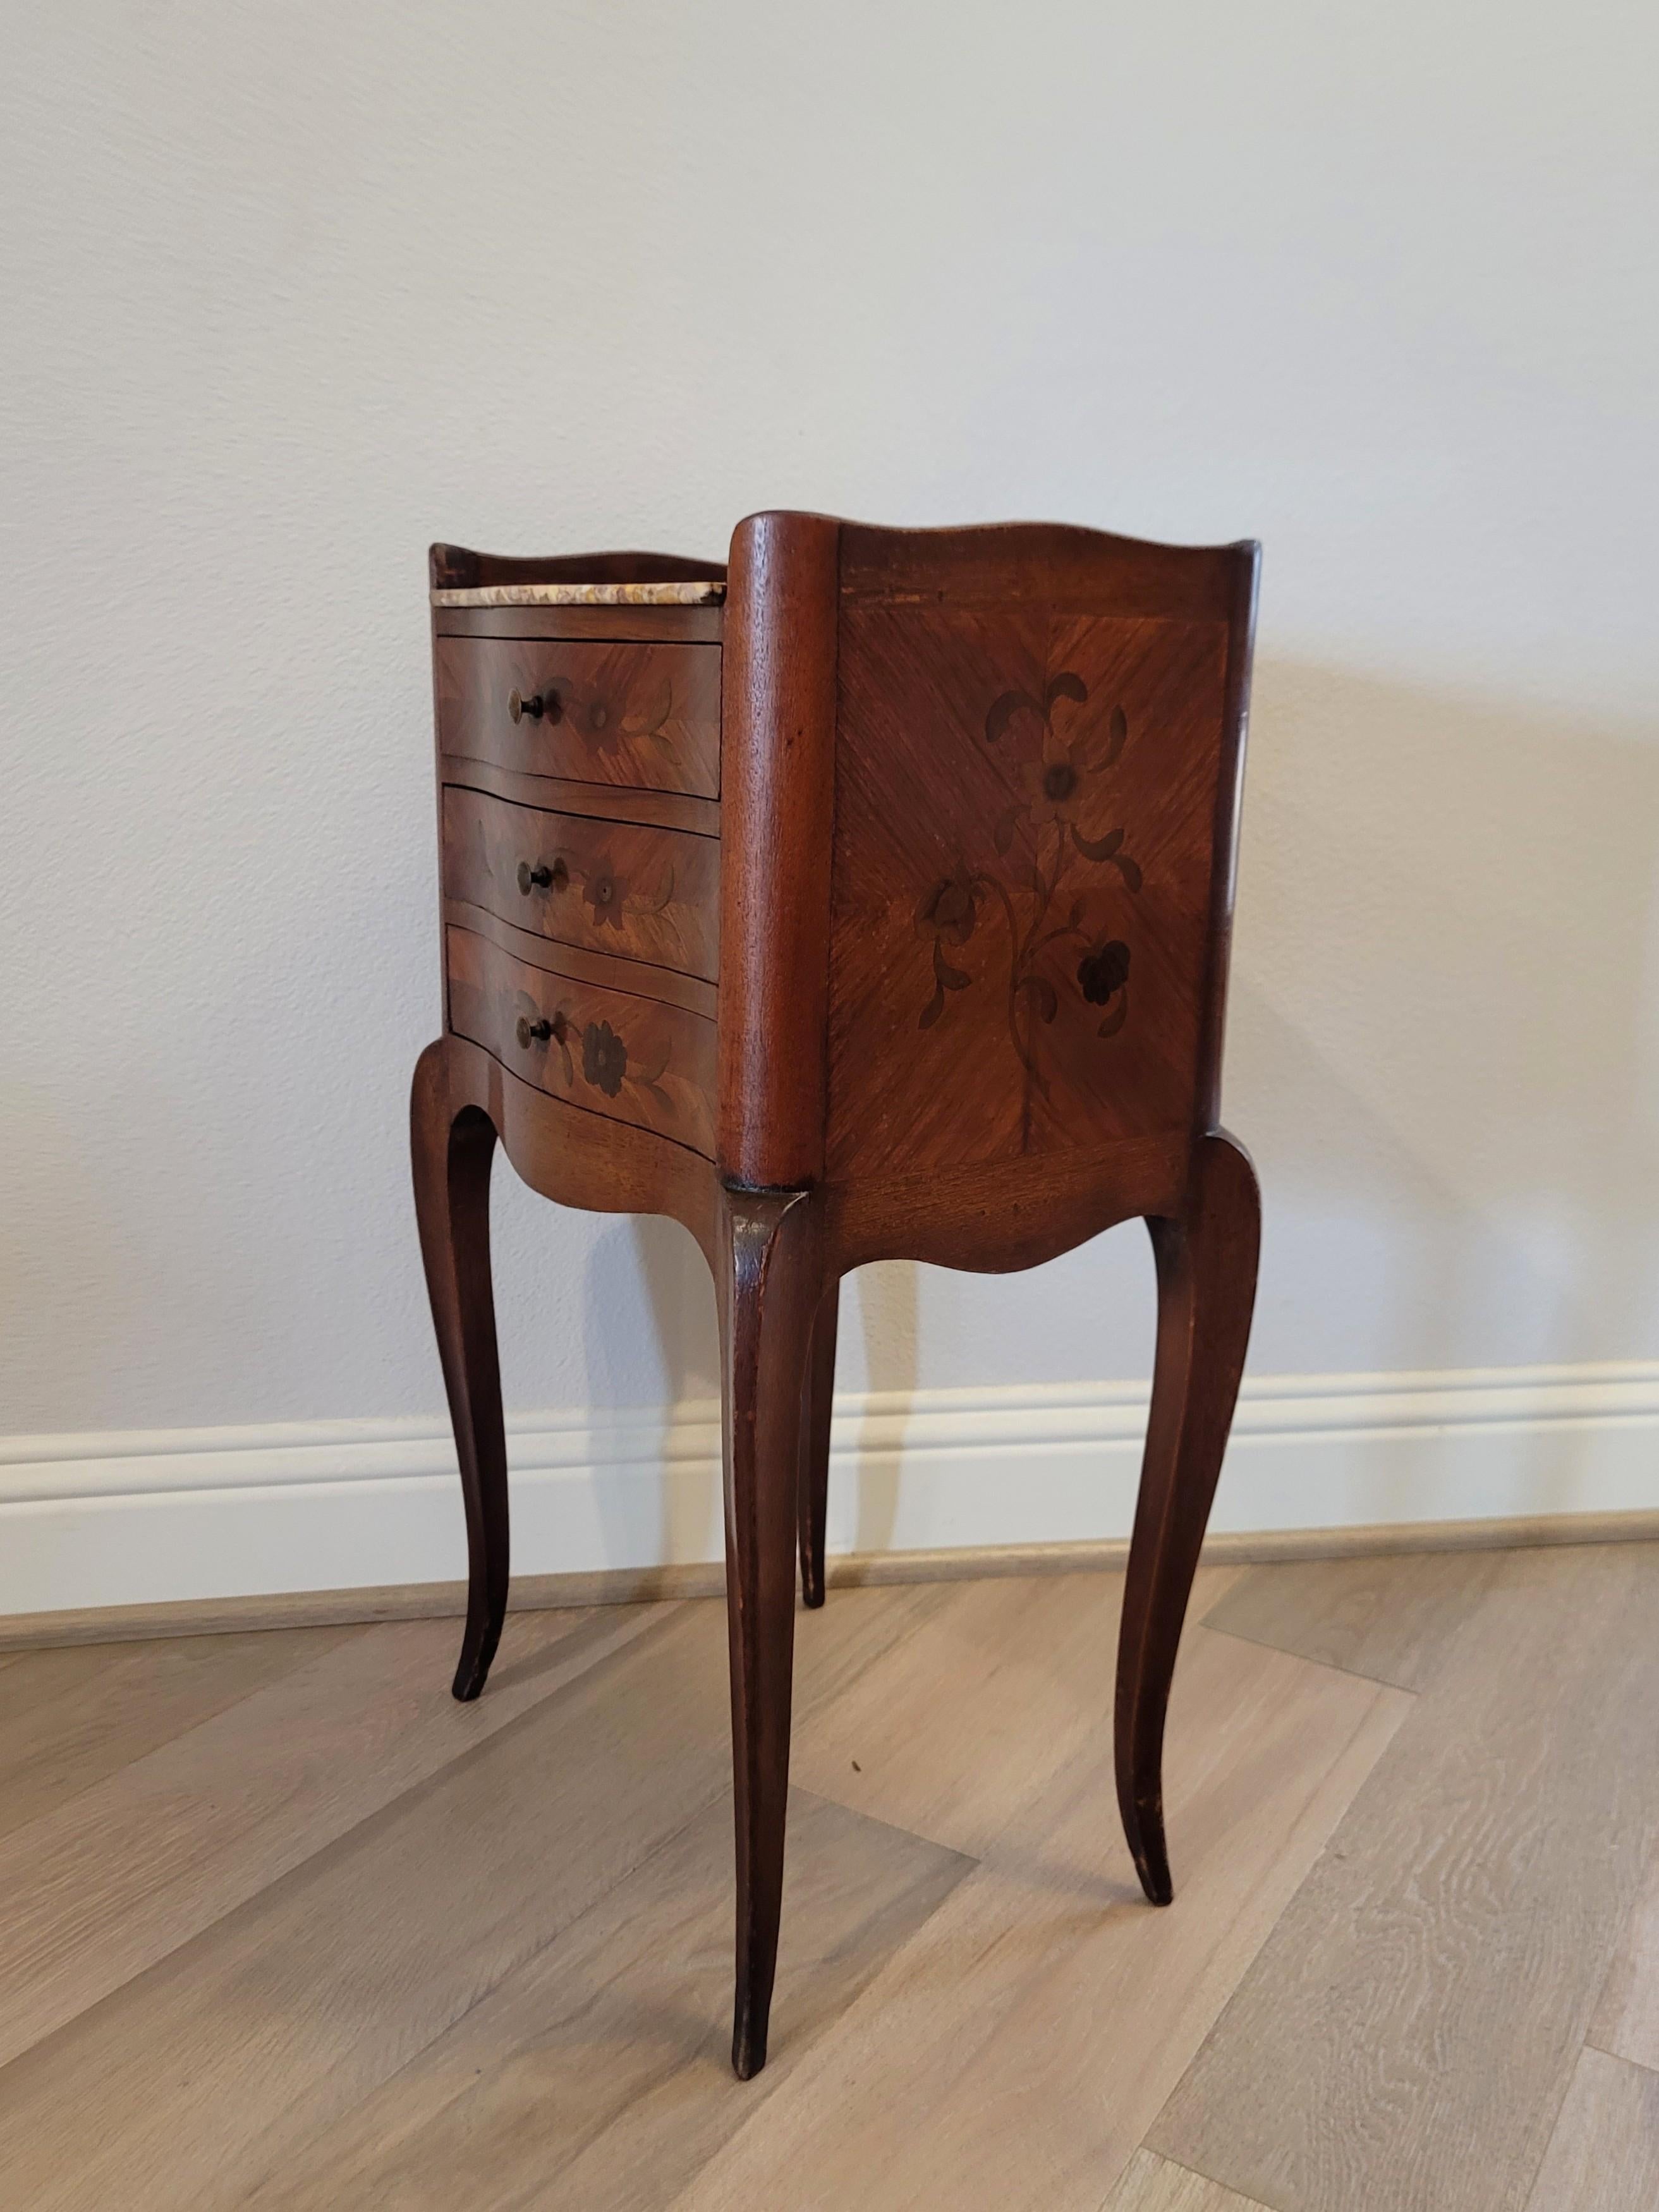 19th Century French Louis XV Style Marquetry Inlaid Nightstand Table For Sale 13